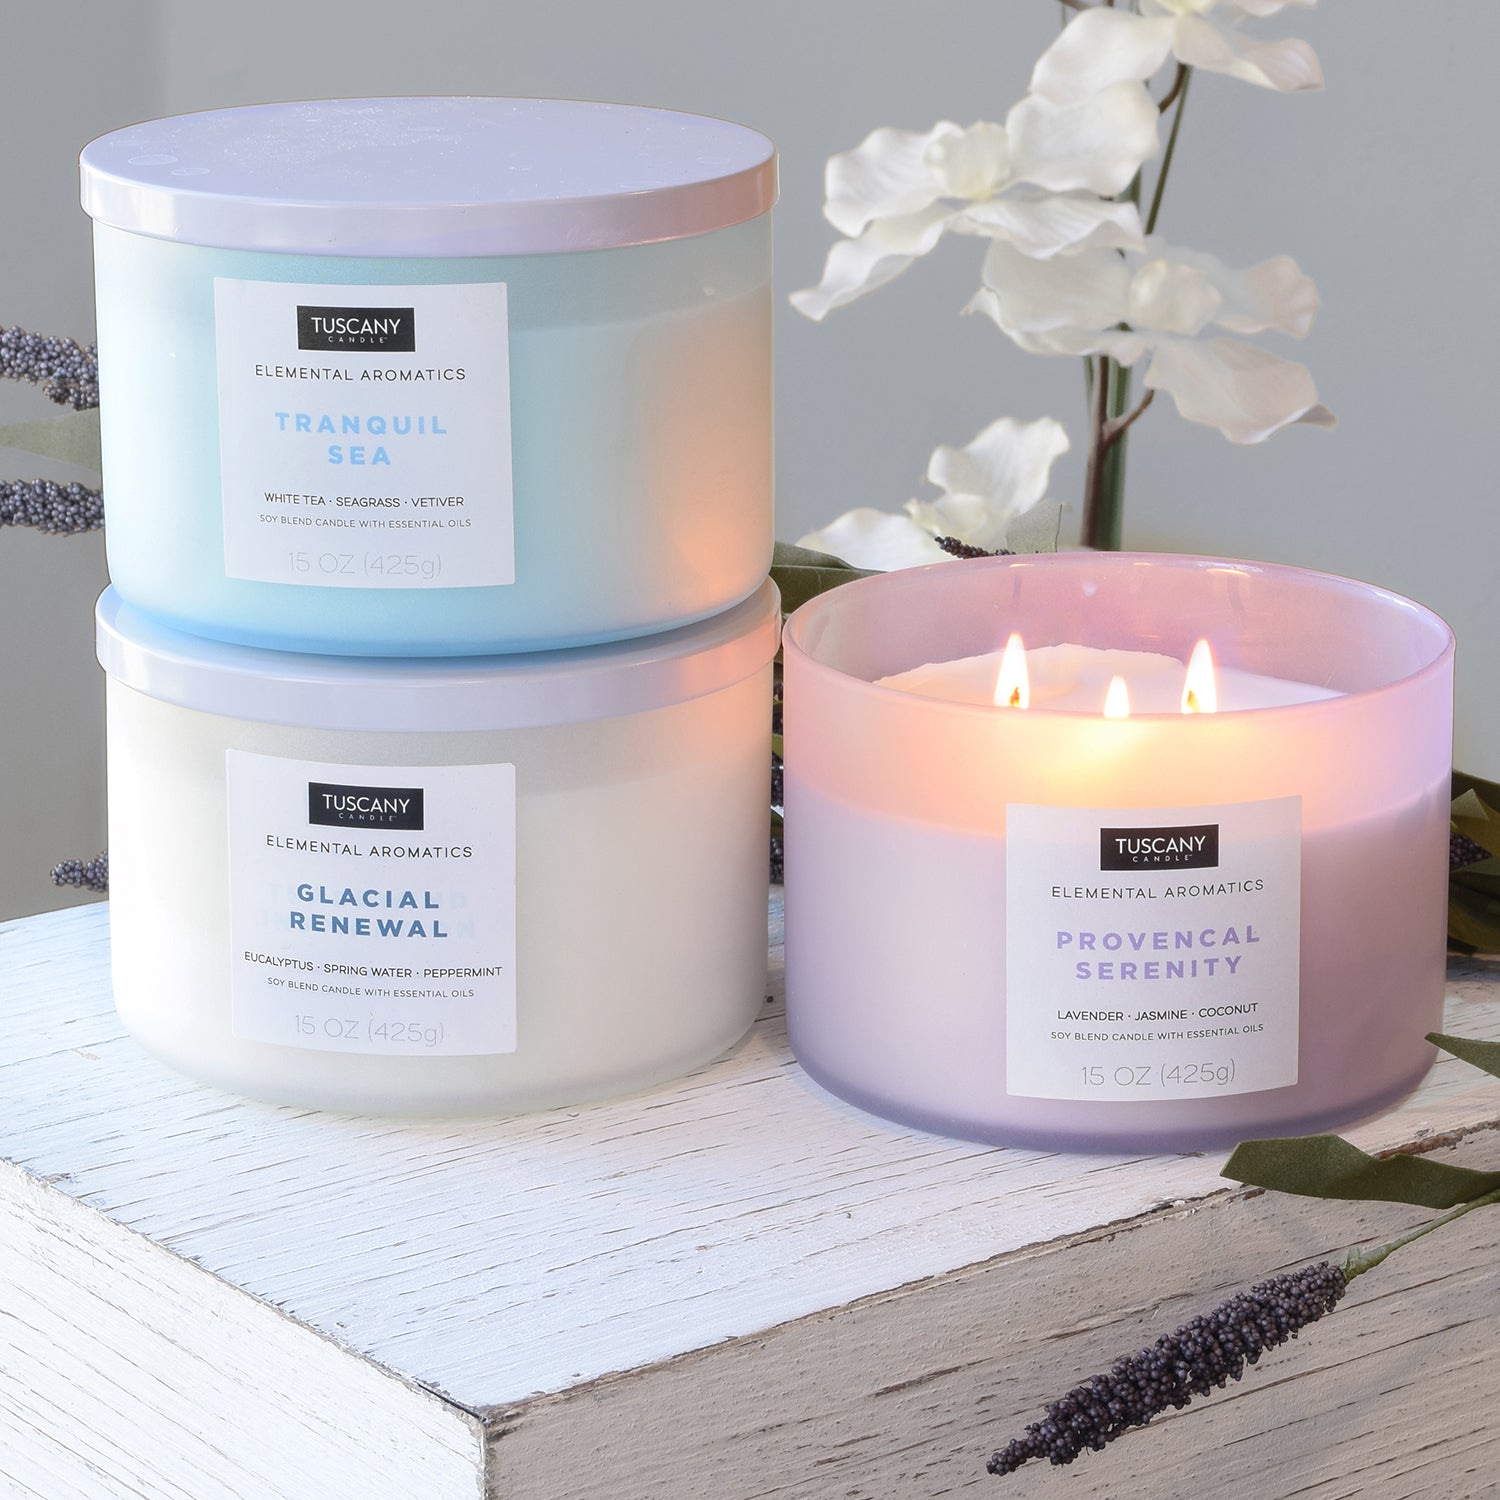 Three Provencal Serenity Scented Jar Candles (15 oz) from the Tuscany Candle brand, perfect for relaxation, displayed on a table.